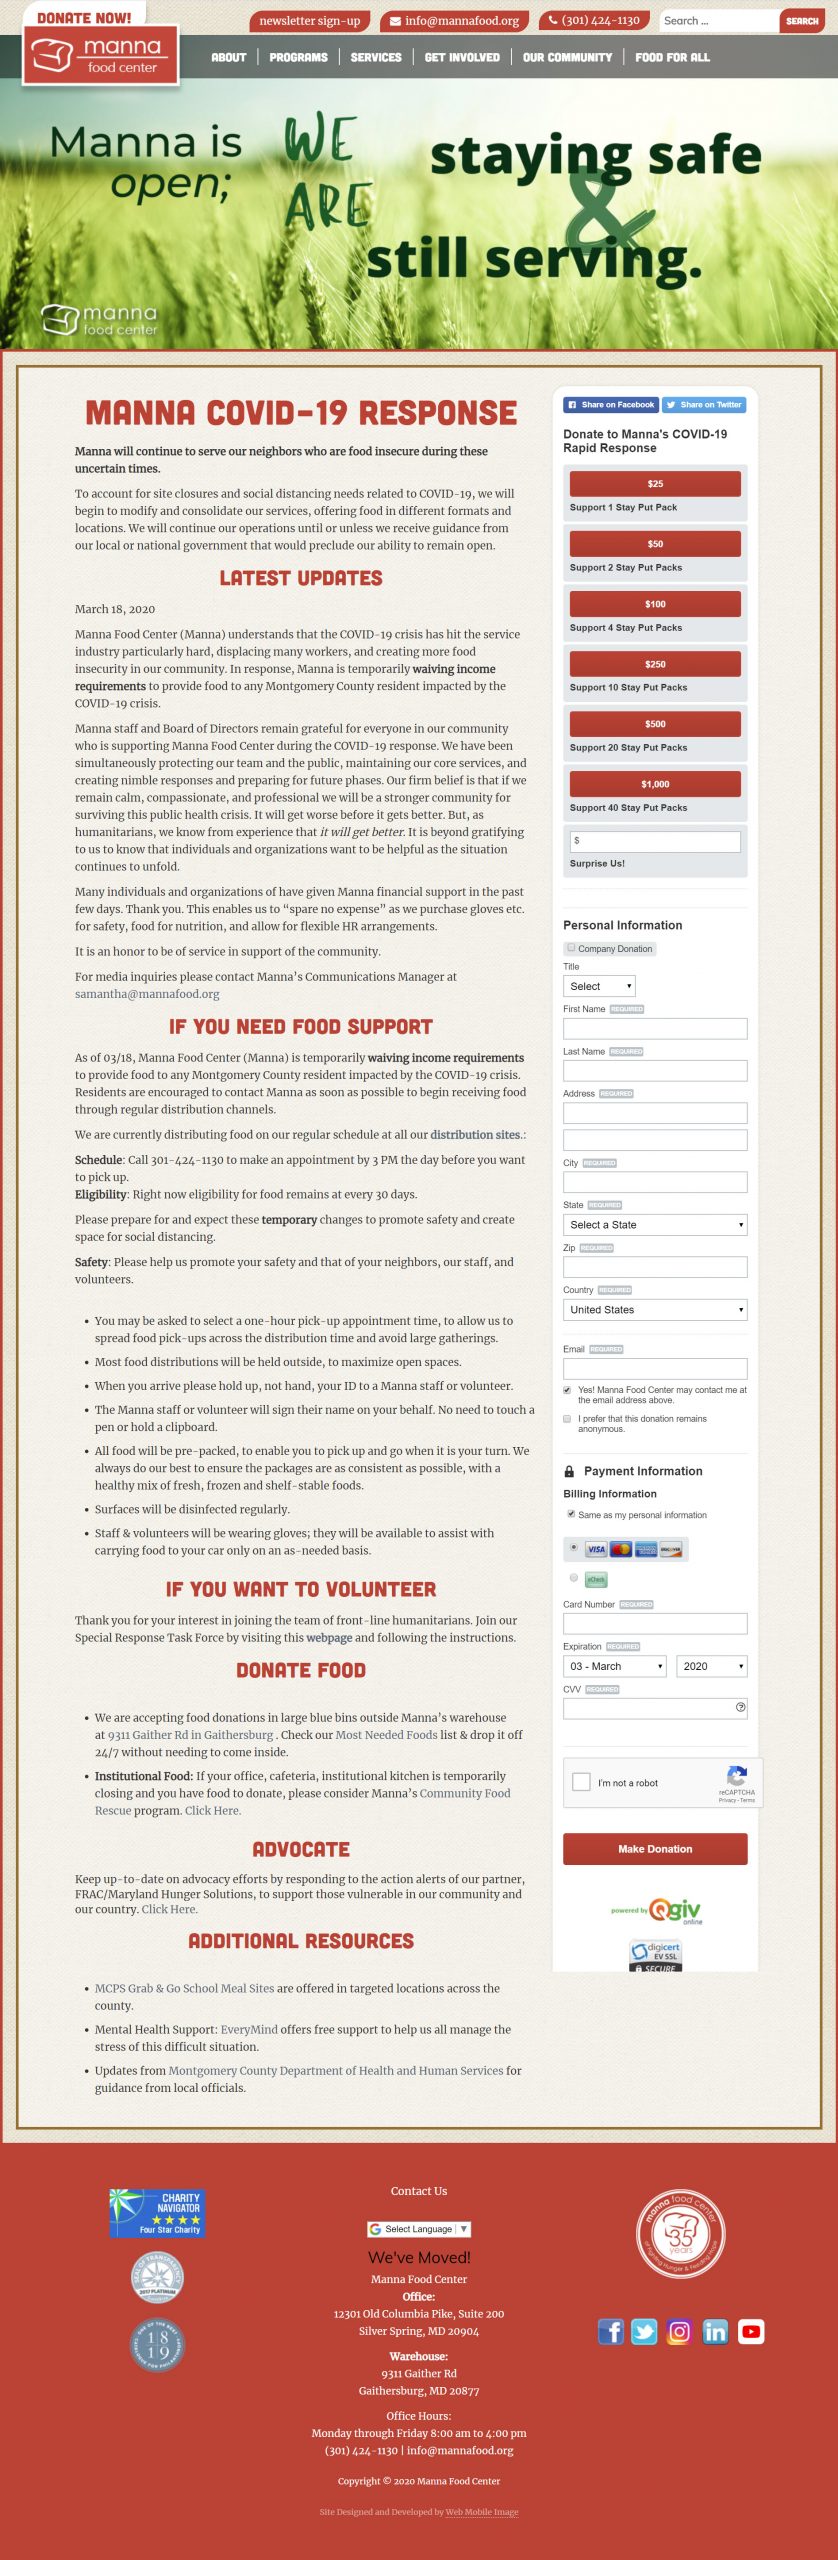 Manna Food Center embedded a Qgiv donation form on their covid-19 response page and explained that the threat of food insecurity is real and they need donors to stay stocked to support the community.